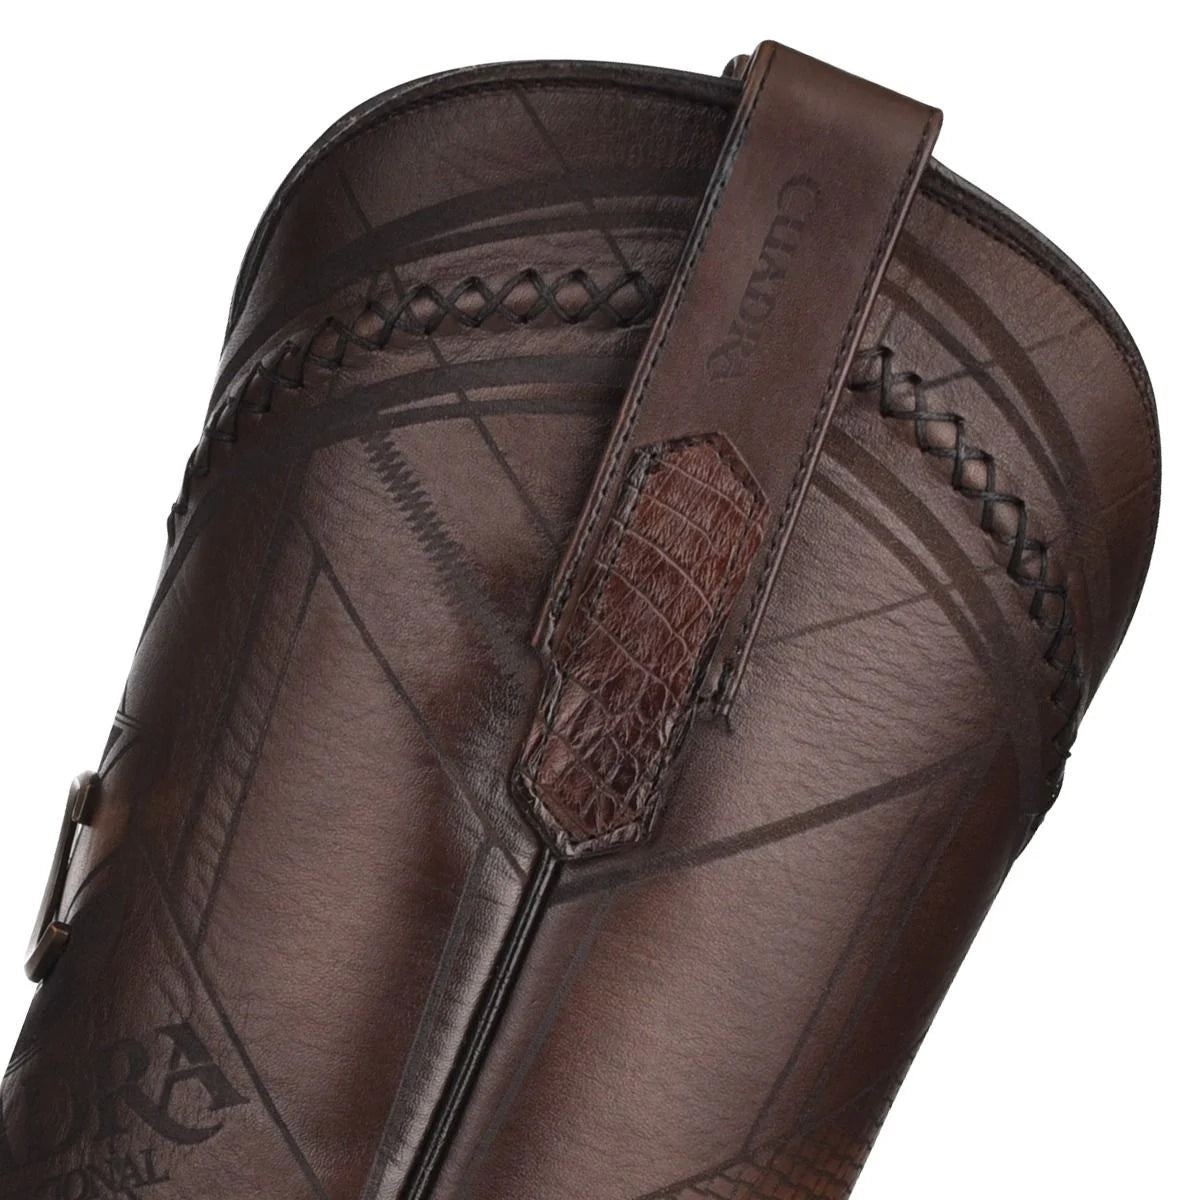 Cuadra engraved exotic dark brown leather boots